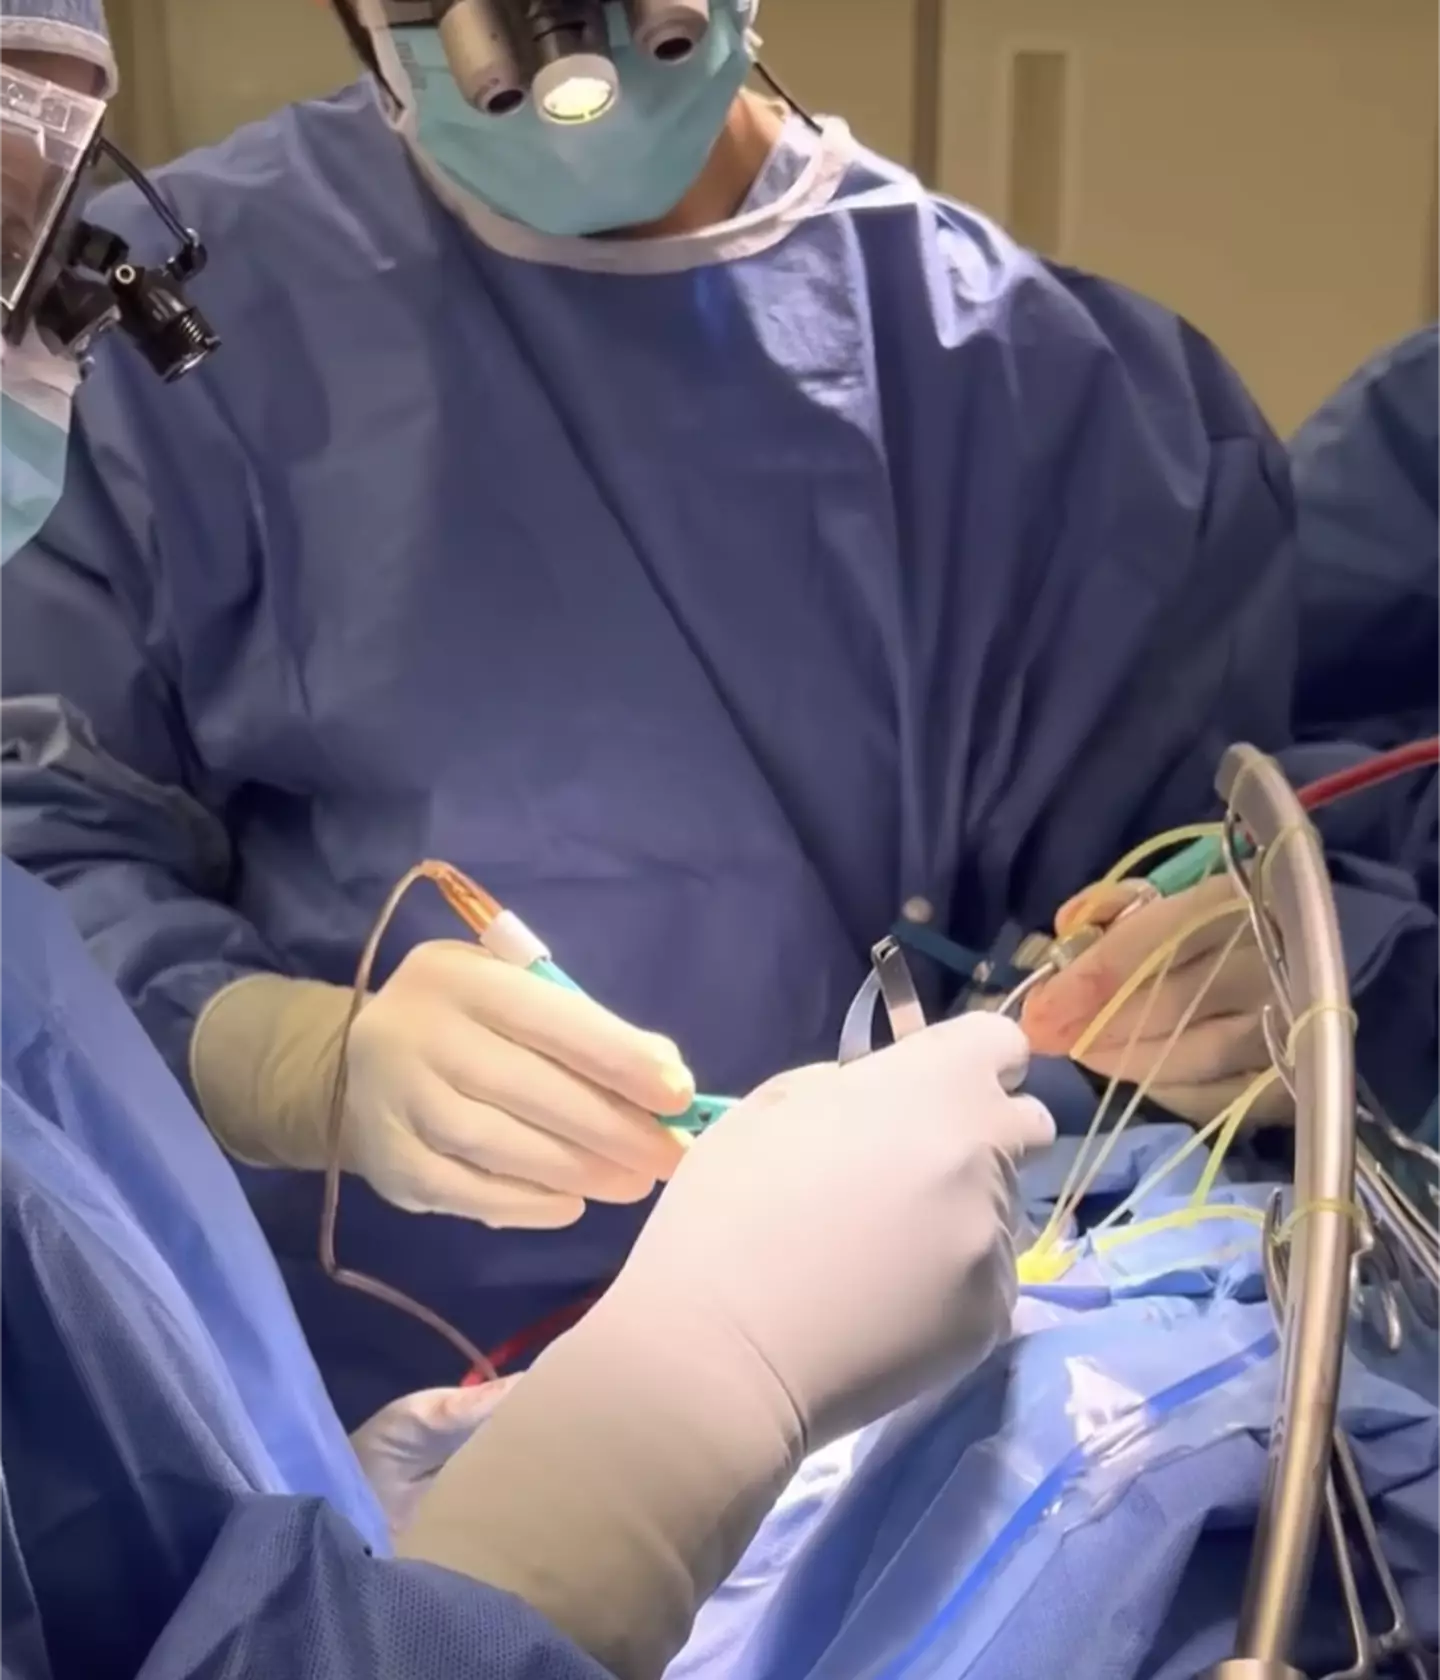 The surgical team needed Krystina to sings to prevent any damage.